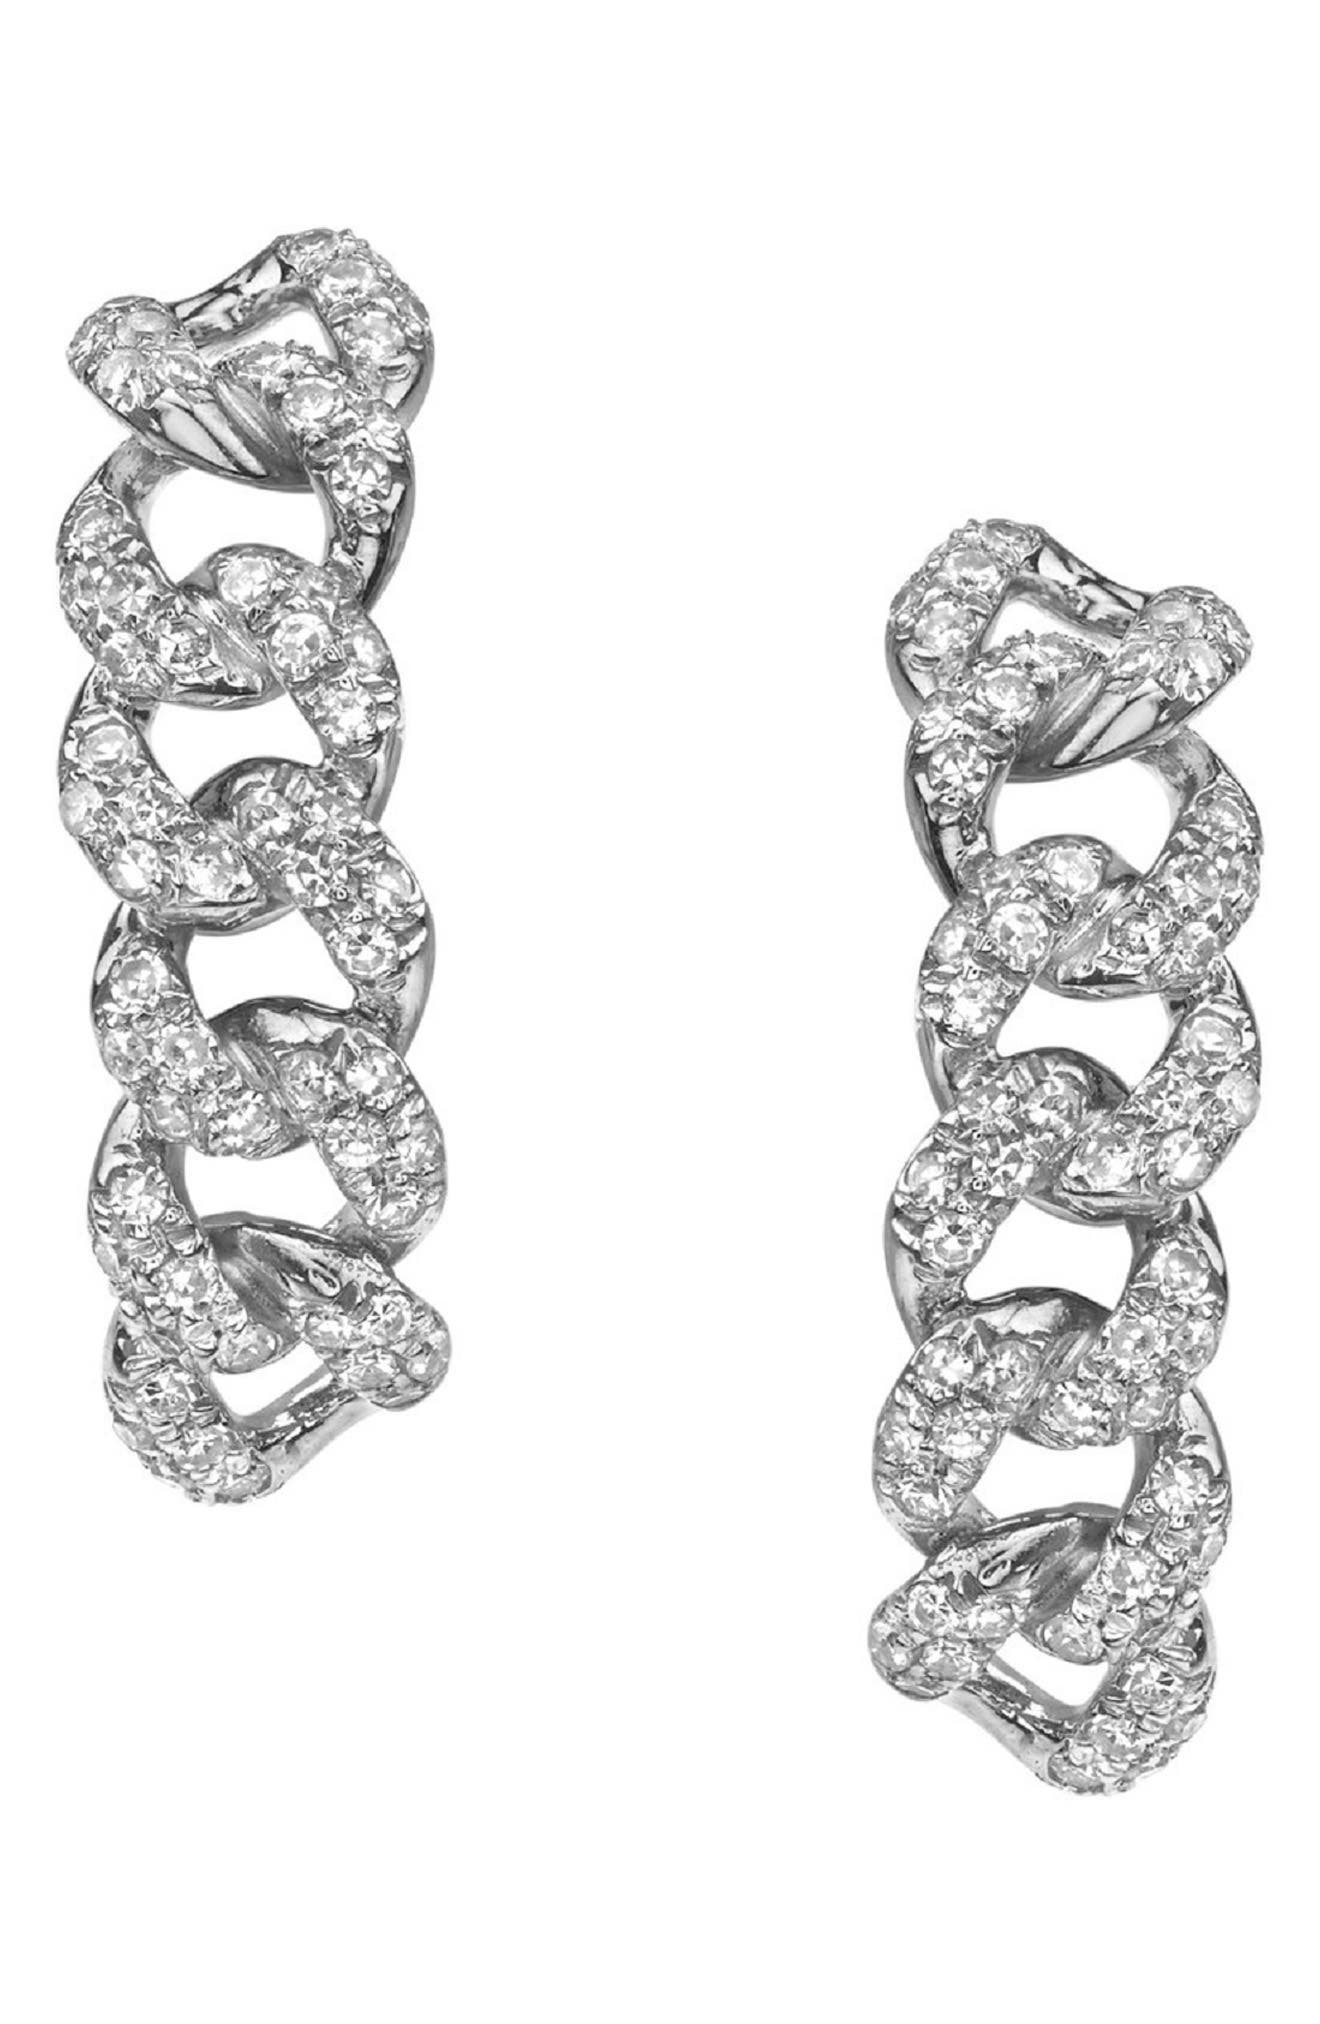 SHAY Essential Six Link Diamond Earrings in White Gold/diamond at Nordstrom